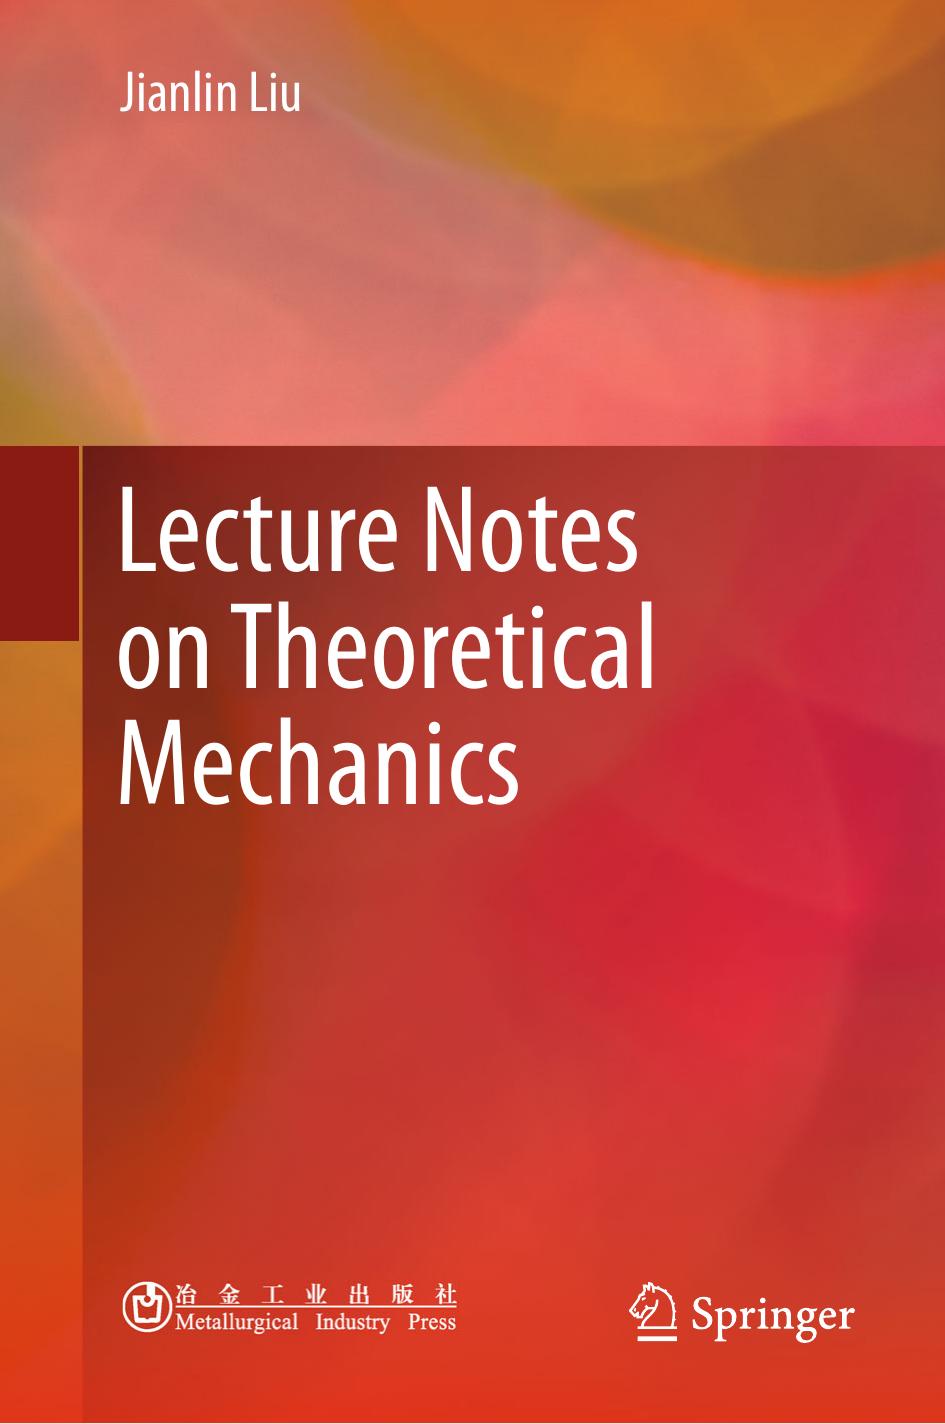 Lecture Notes on Theoretical Mechanics by Jianlin Liu